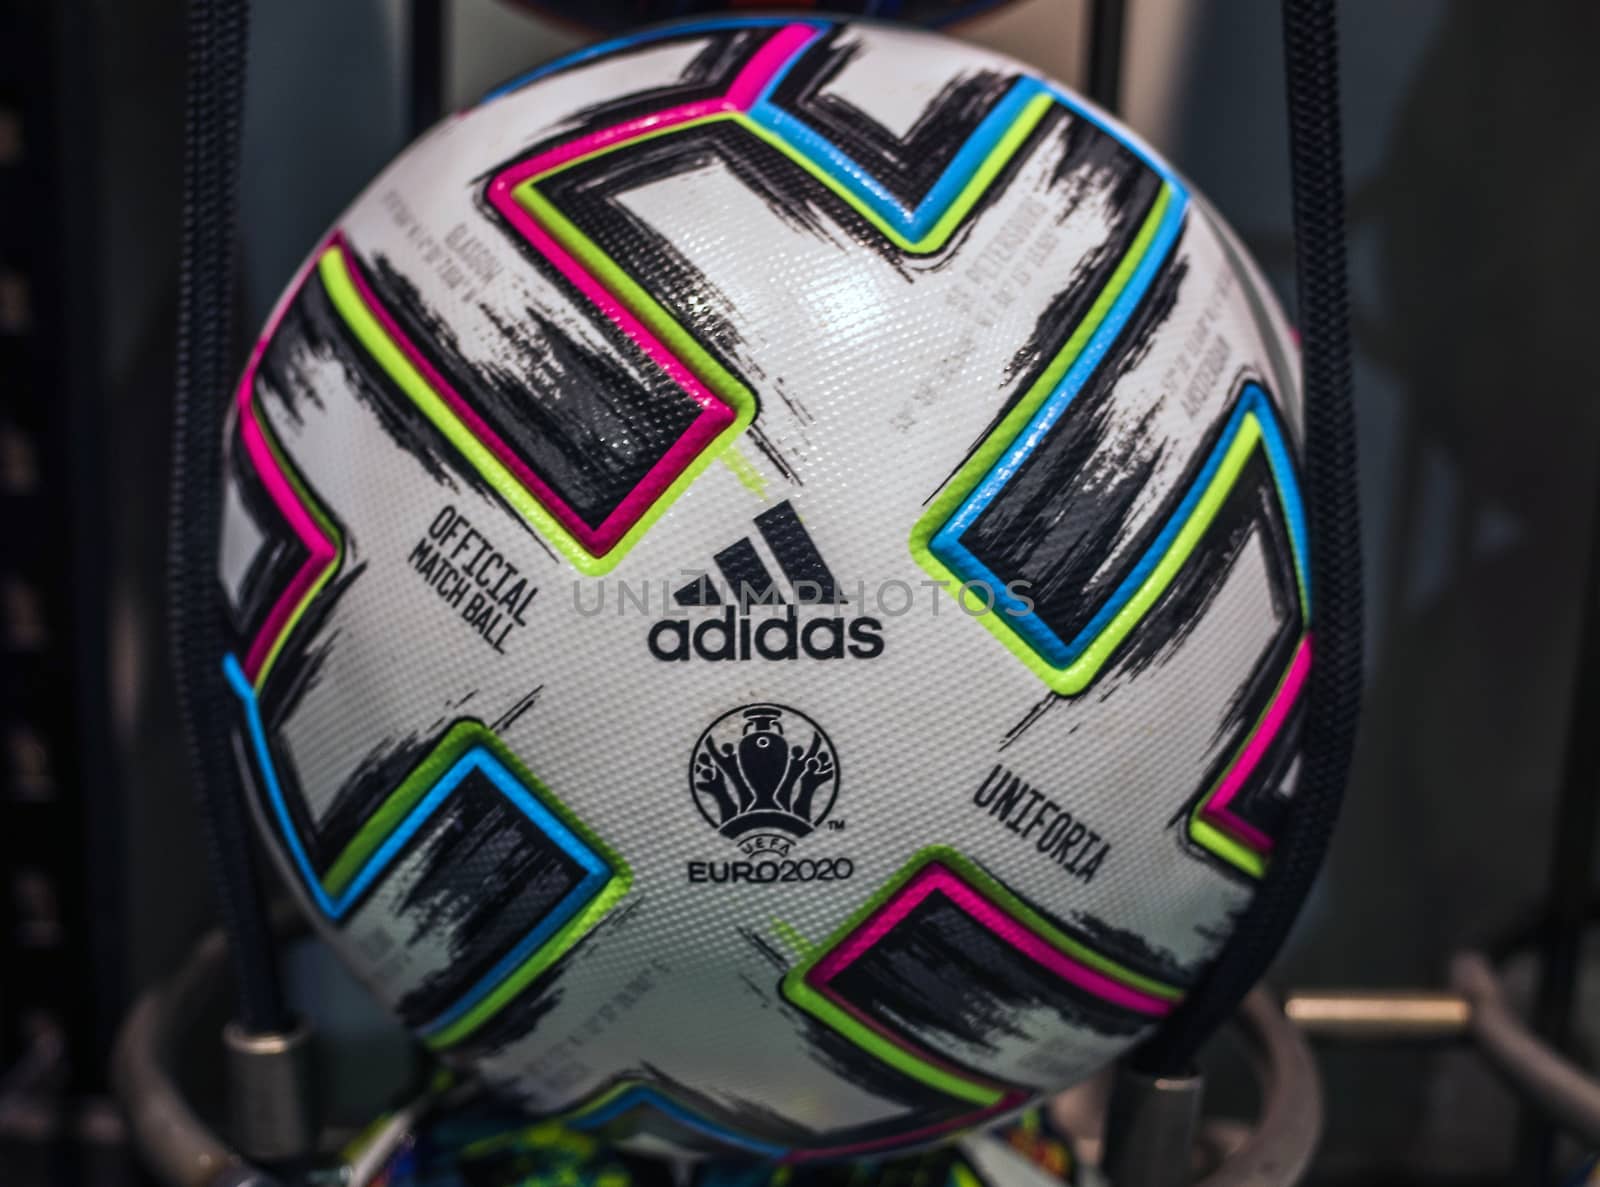 10 November 2019 London, United Kingdom. The official ball of the European football Championship 2020 Adidas Uniforia Competition in the sports shop window.